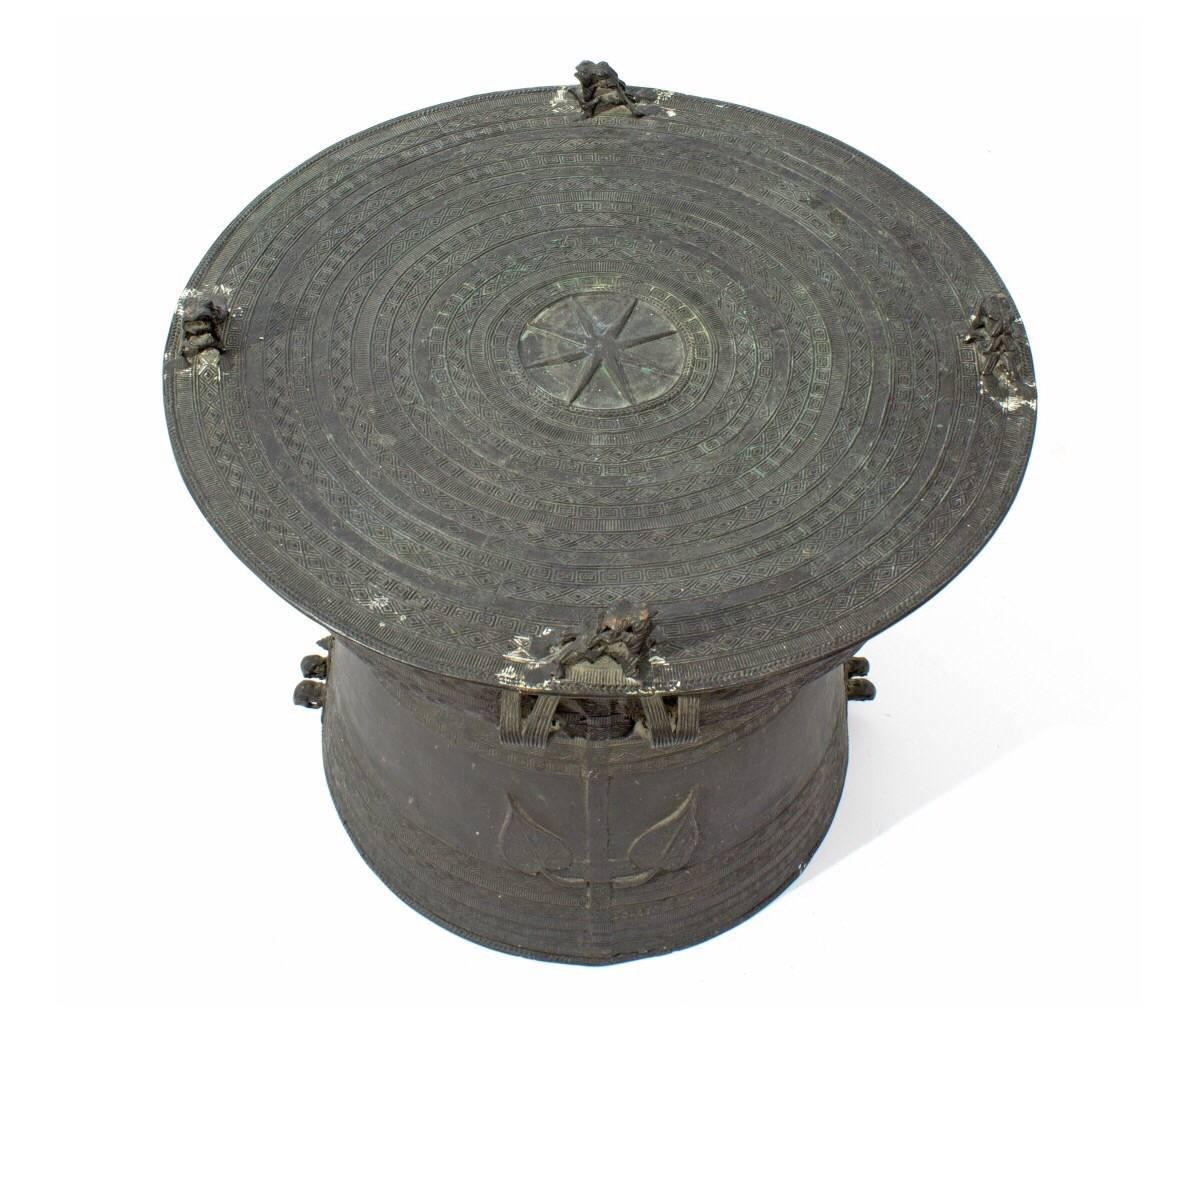 Vintage Asian bronze rain drum table. Ideal as an accent table or tall coffee table. May be used outdoors in a covered area. Measures: 20 inches wide x 15.5 inches high.